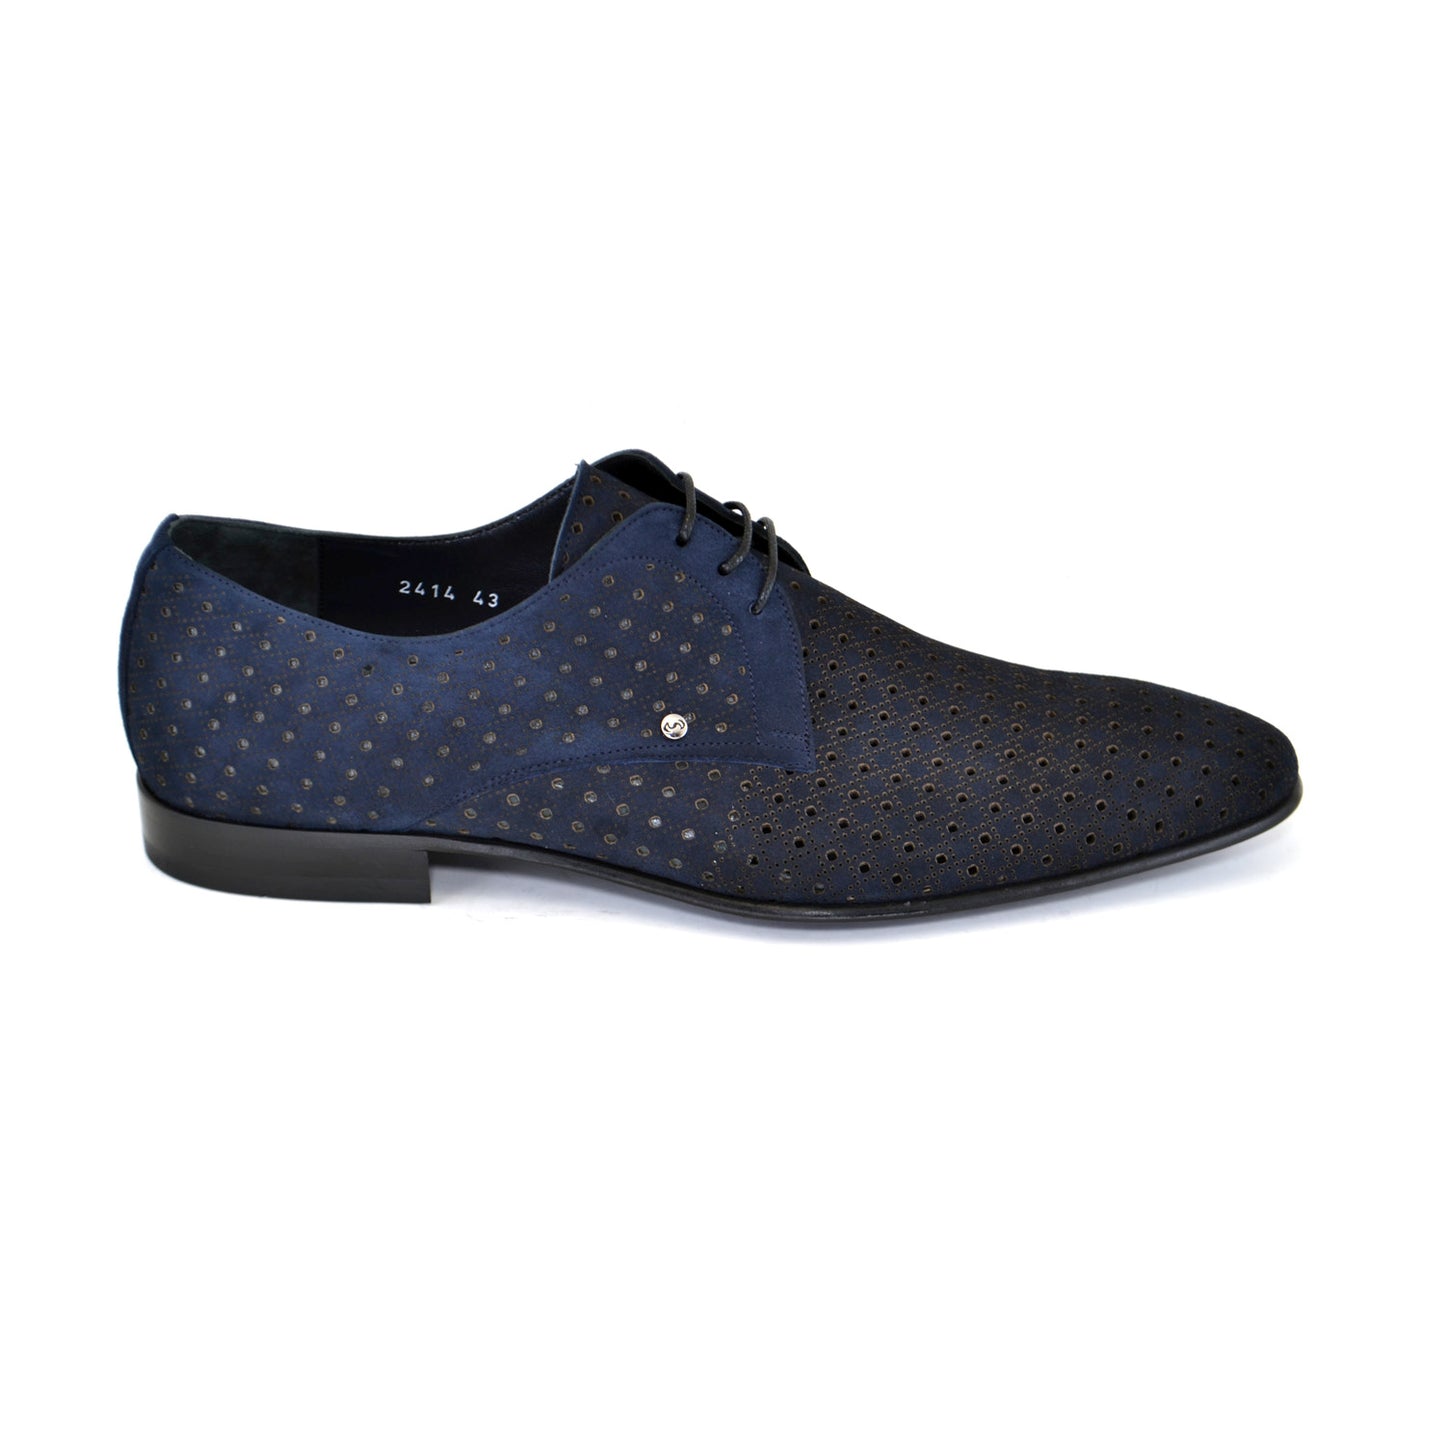 C148-2414 Navy Nubak Perforated Lace Up